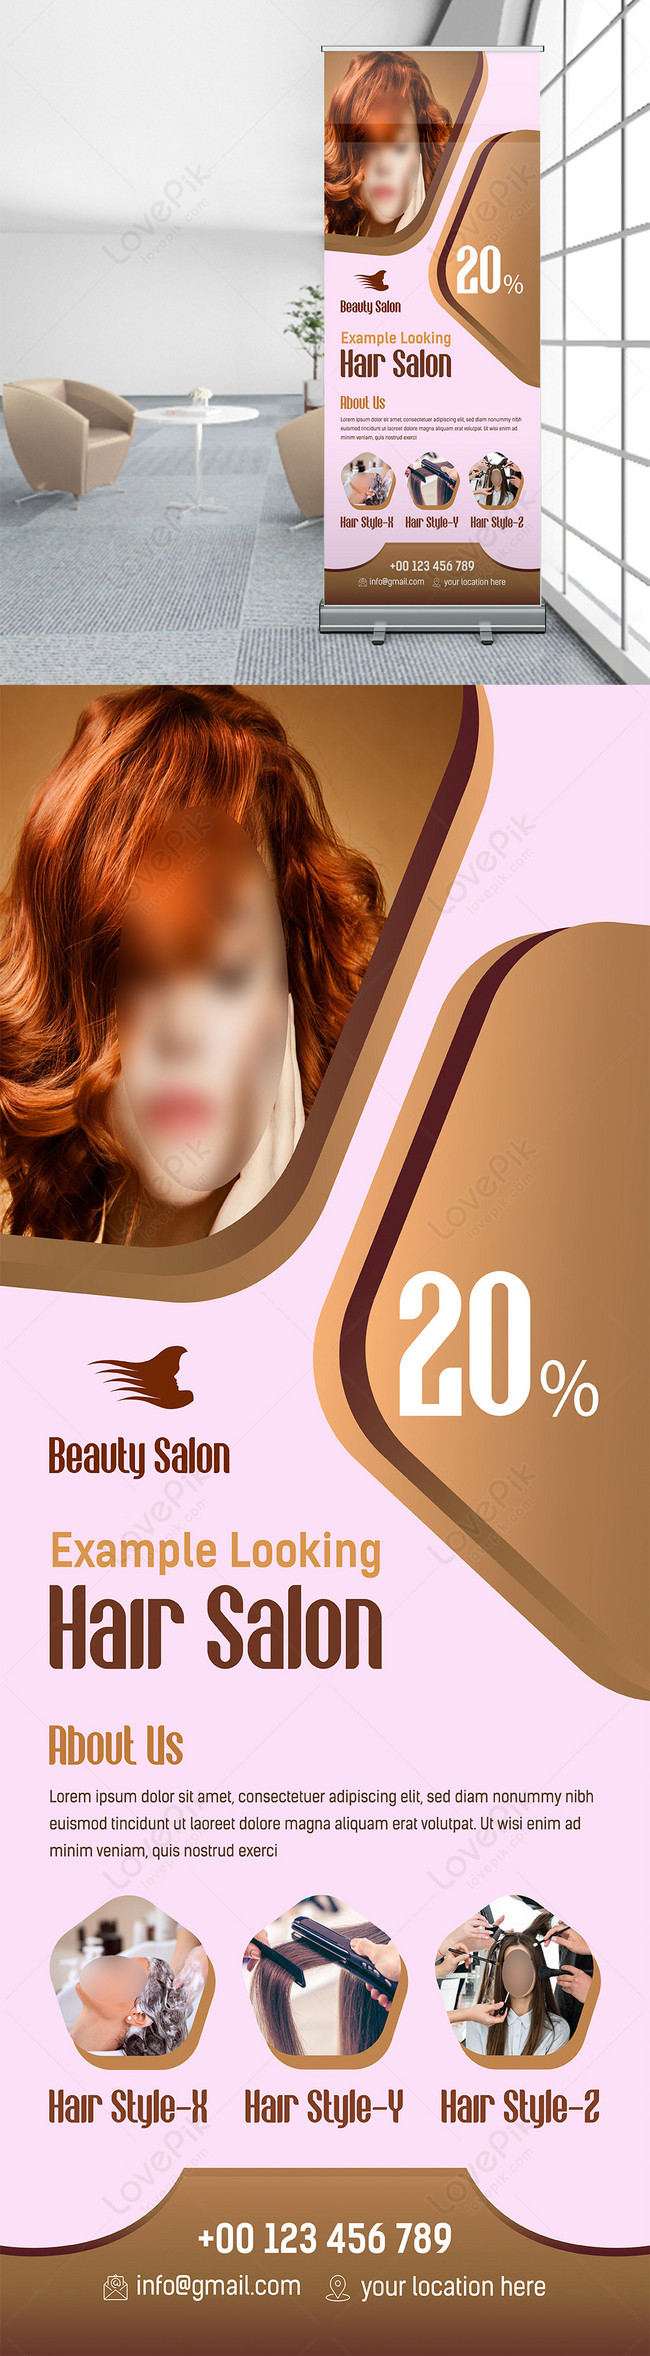 Modern beauty salon roll up banner template image_picture free download  